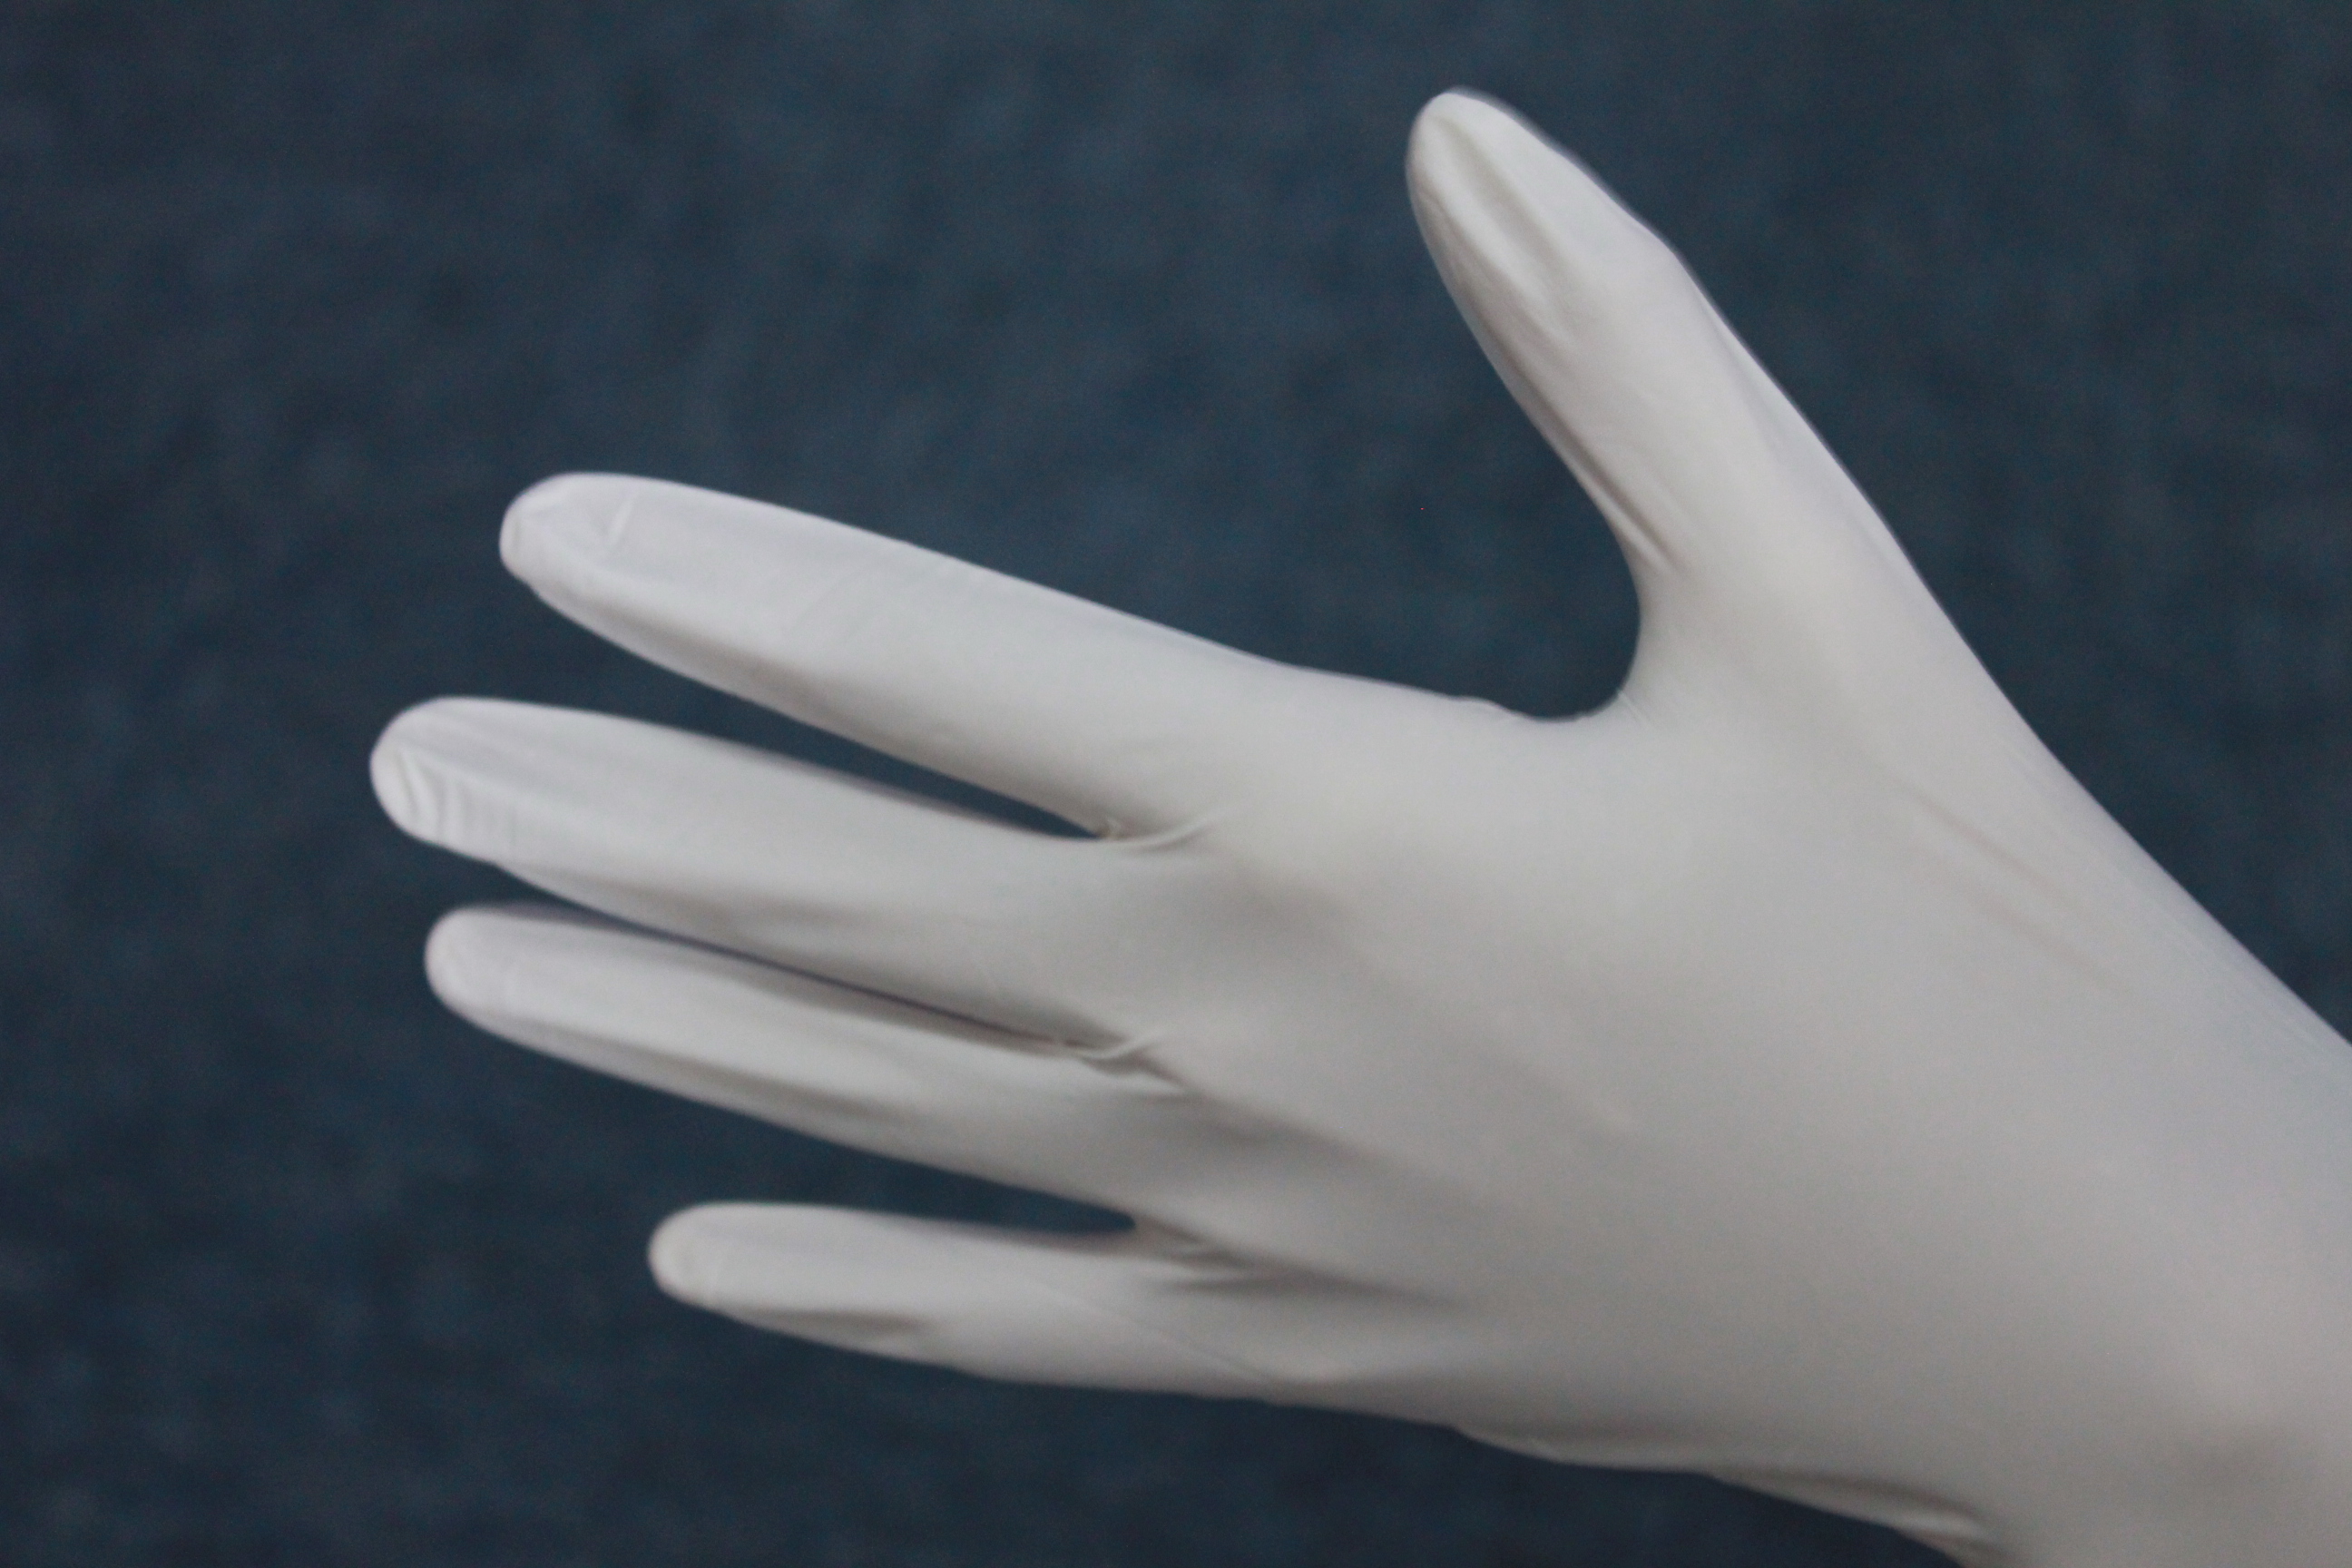 The Latest Top Quality Cheap Price 9 inch Disposable white Nitrile Gloves 100% Powder Free Nitrile Gloves